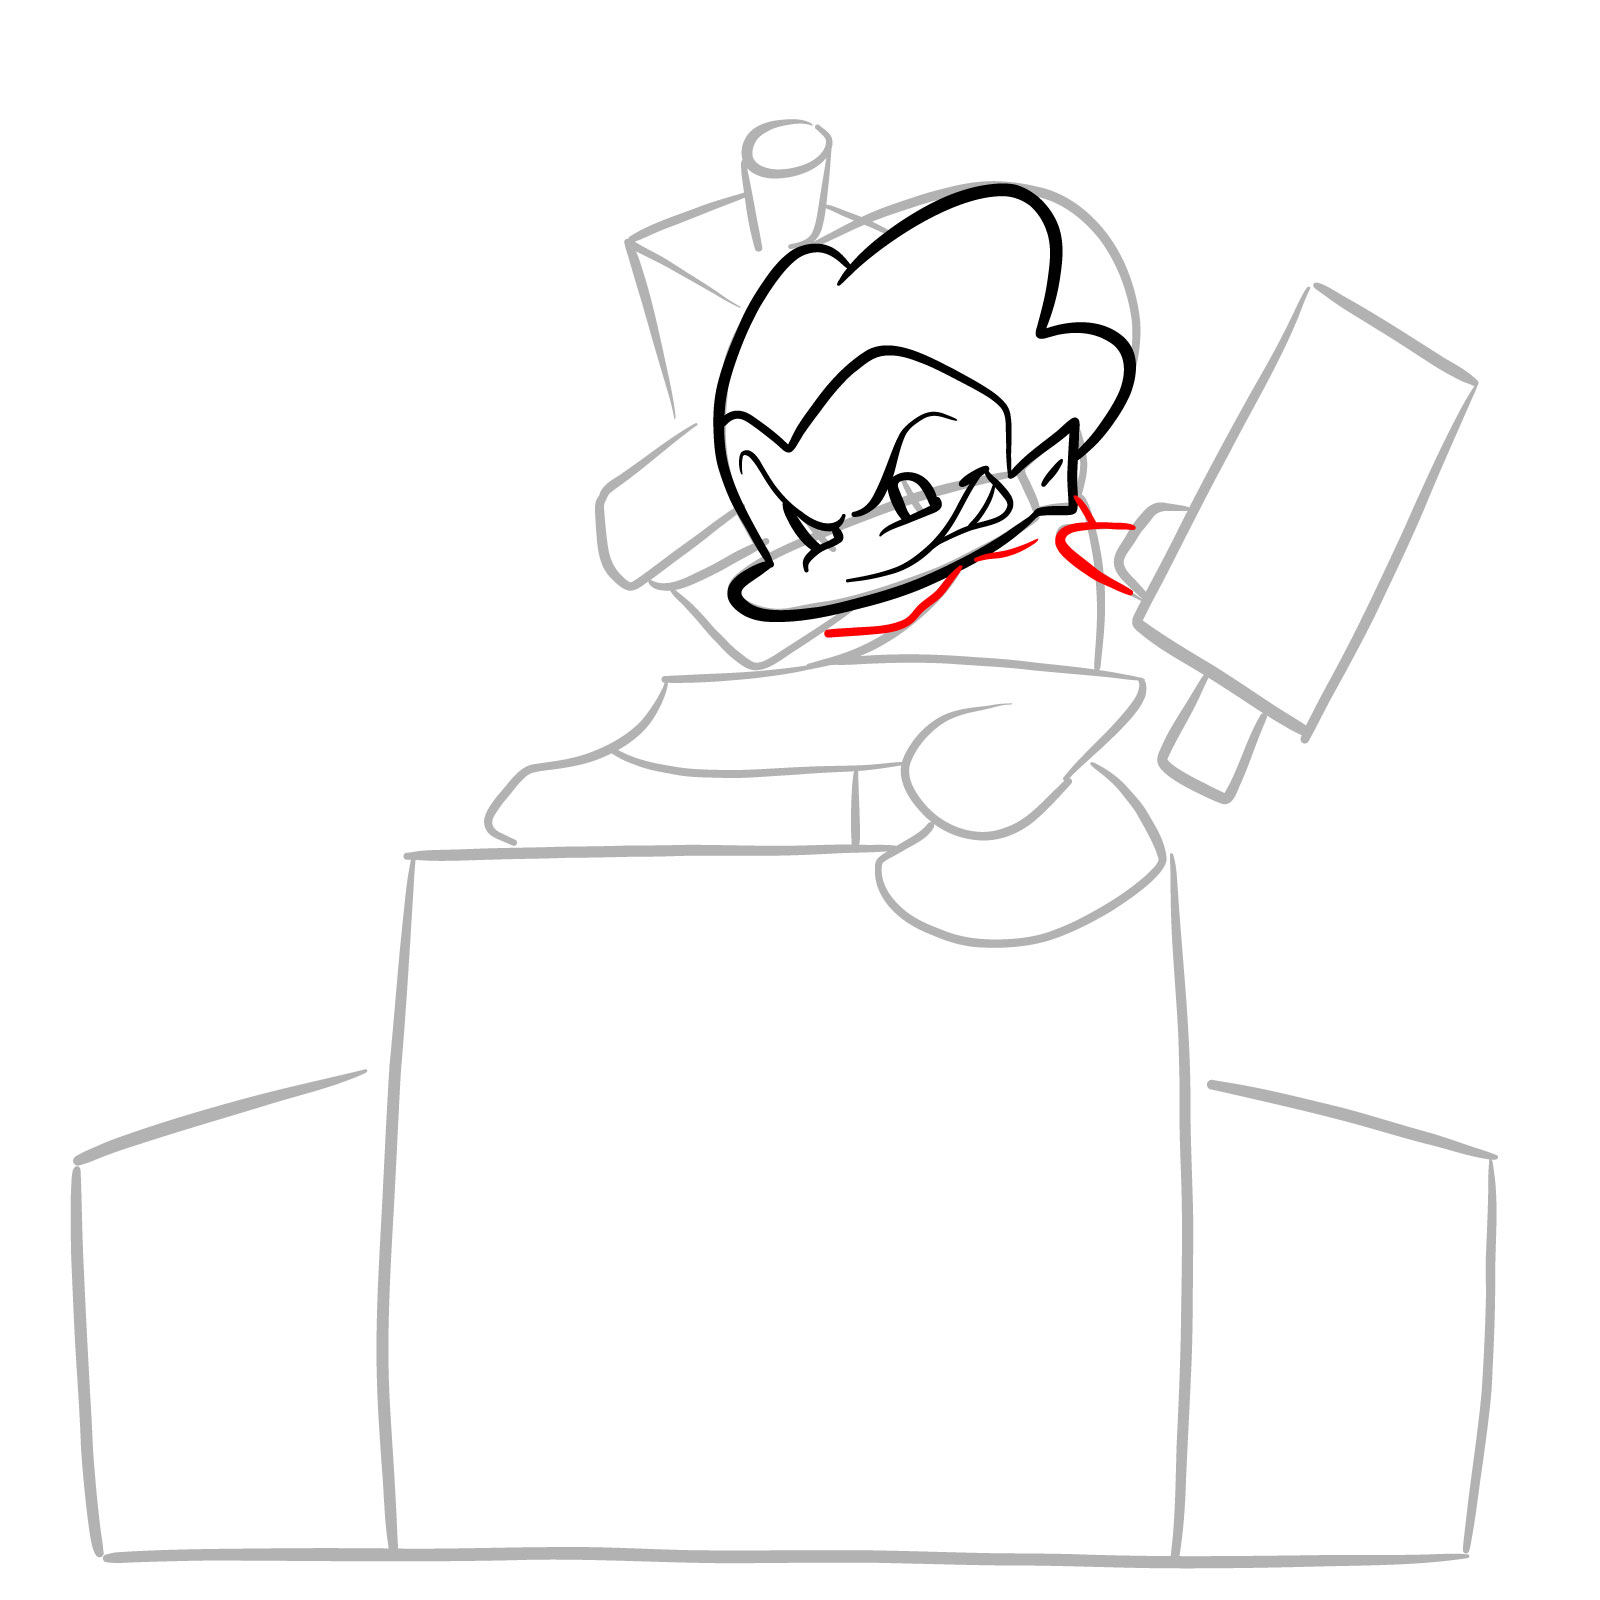 How to draw Pico on the speakers - step 10